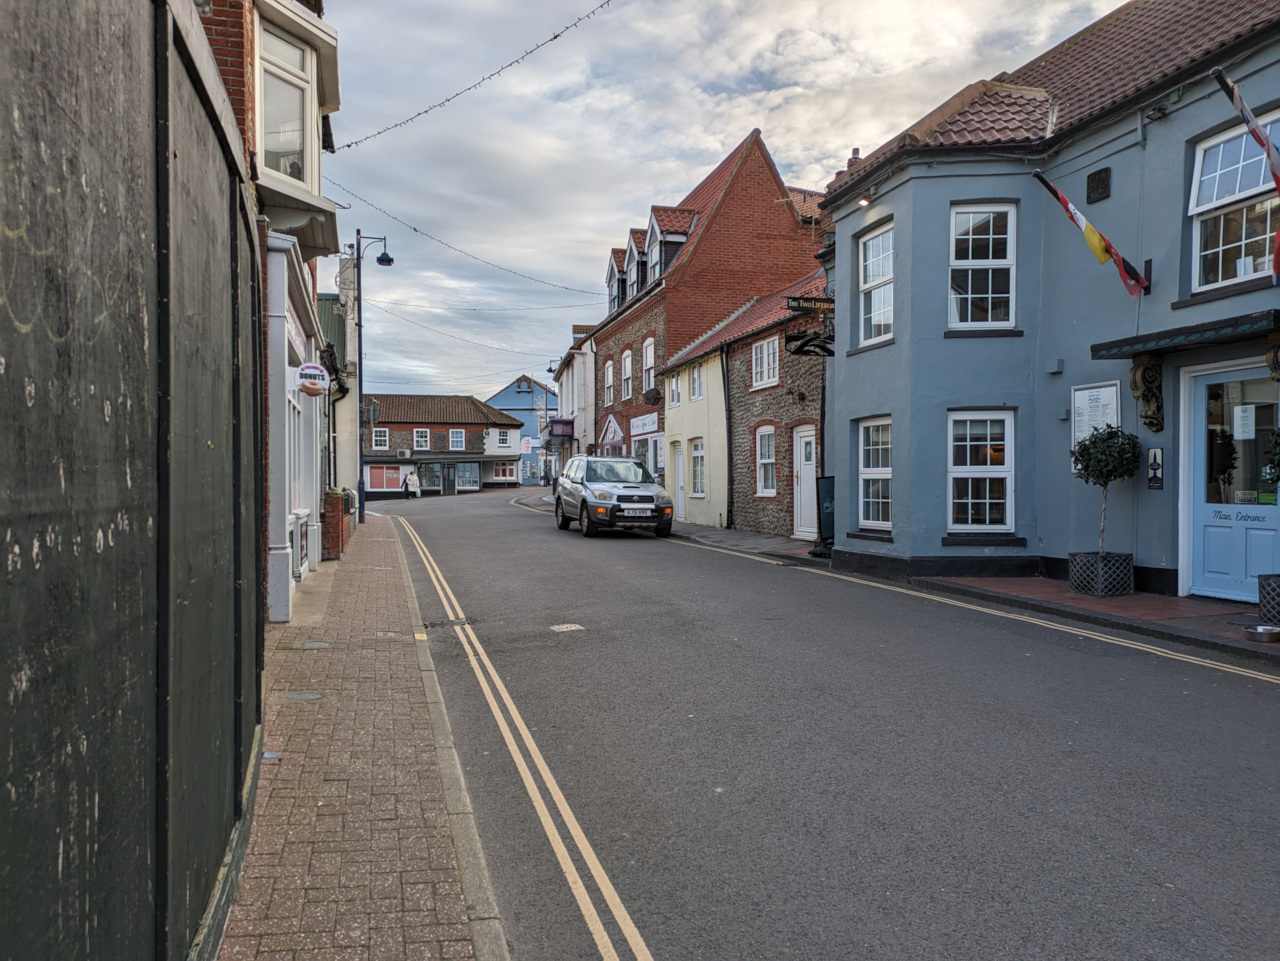 Street in Sheringham with car parked on side of road